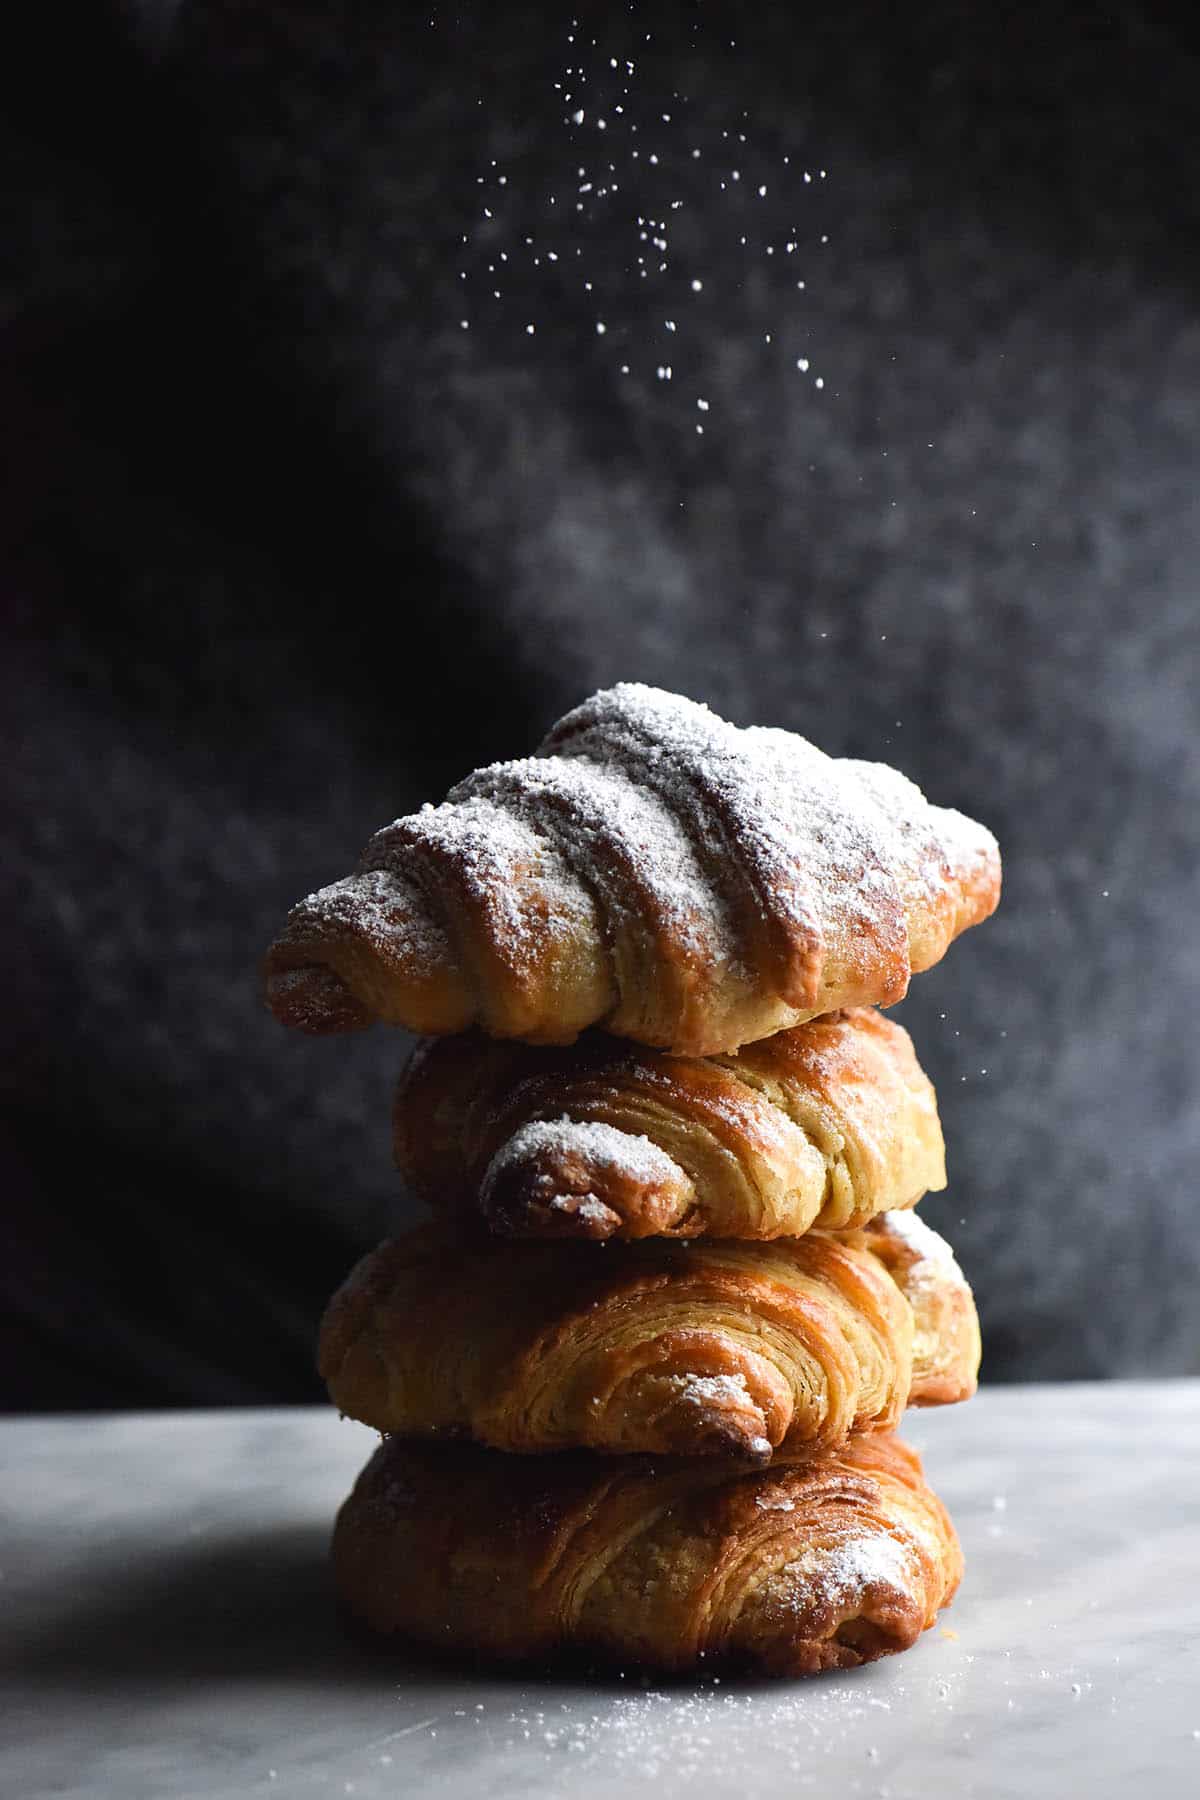 A side on close up view of a stack of gluten free croissants sitting on a white marble table. The background is the torso of a person wearing a dark grey fluffy jumper. The croissants are stacked up on top of each other. The fourth croissant which is at the top is being sprinkled with icing sugar, which contrasts nicely with the dark grey background